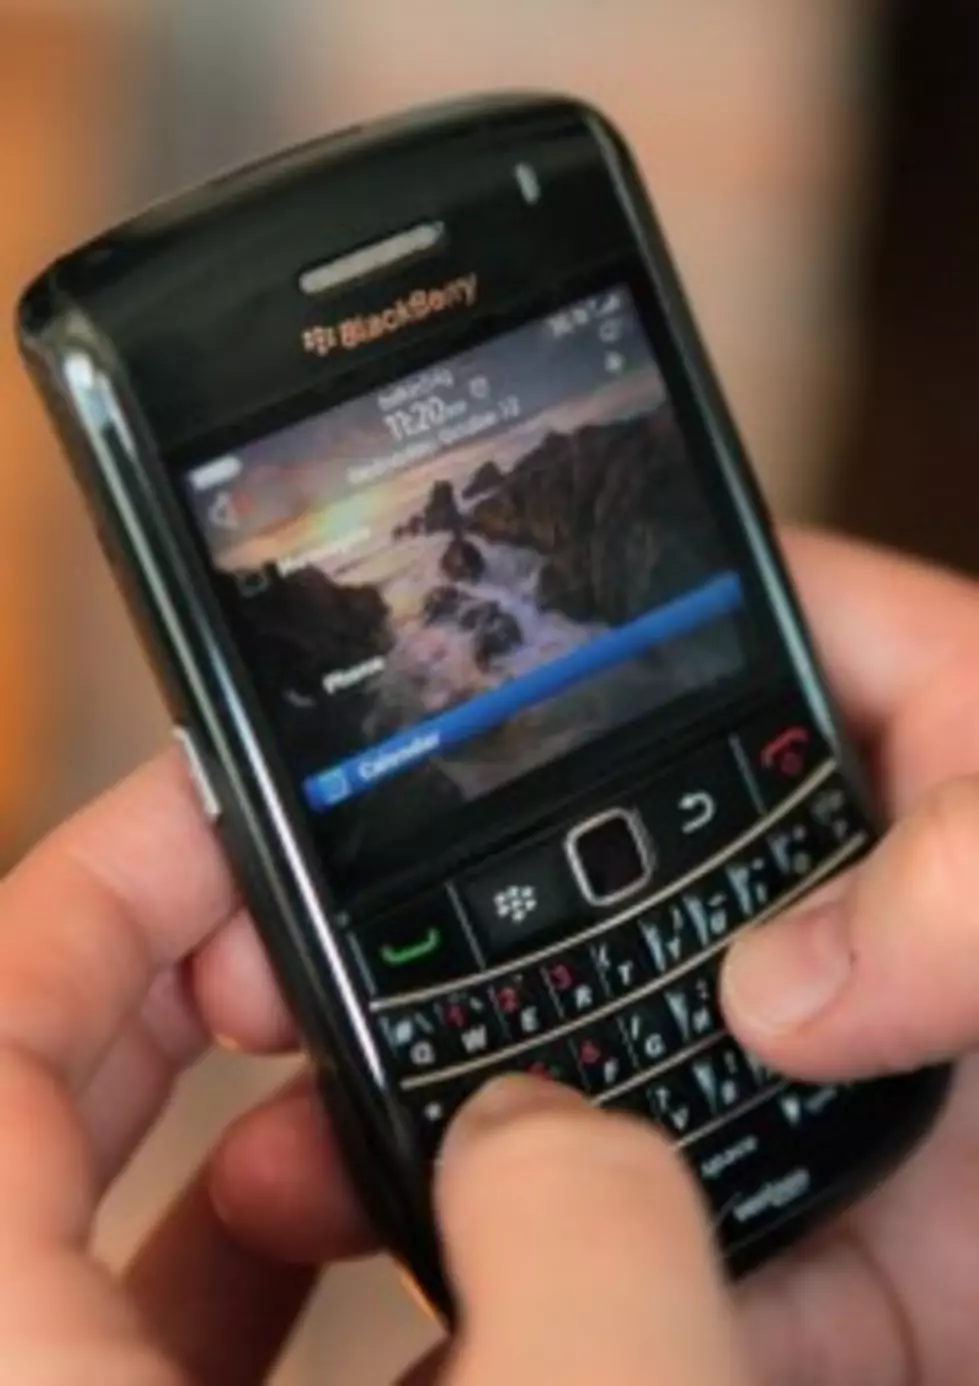 Are You Ready To Junk Your Blackberry?